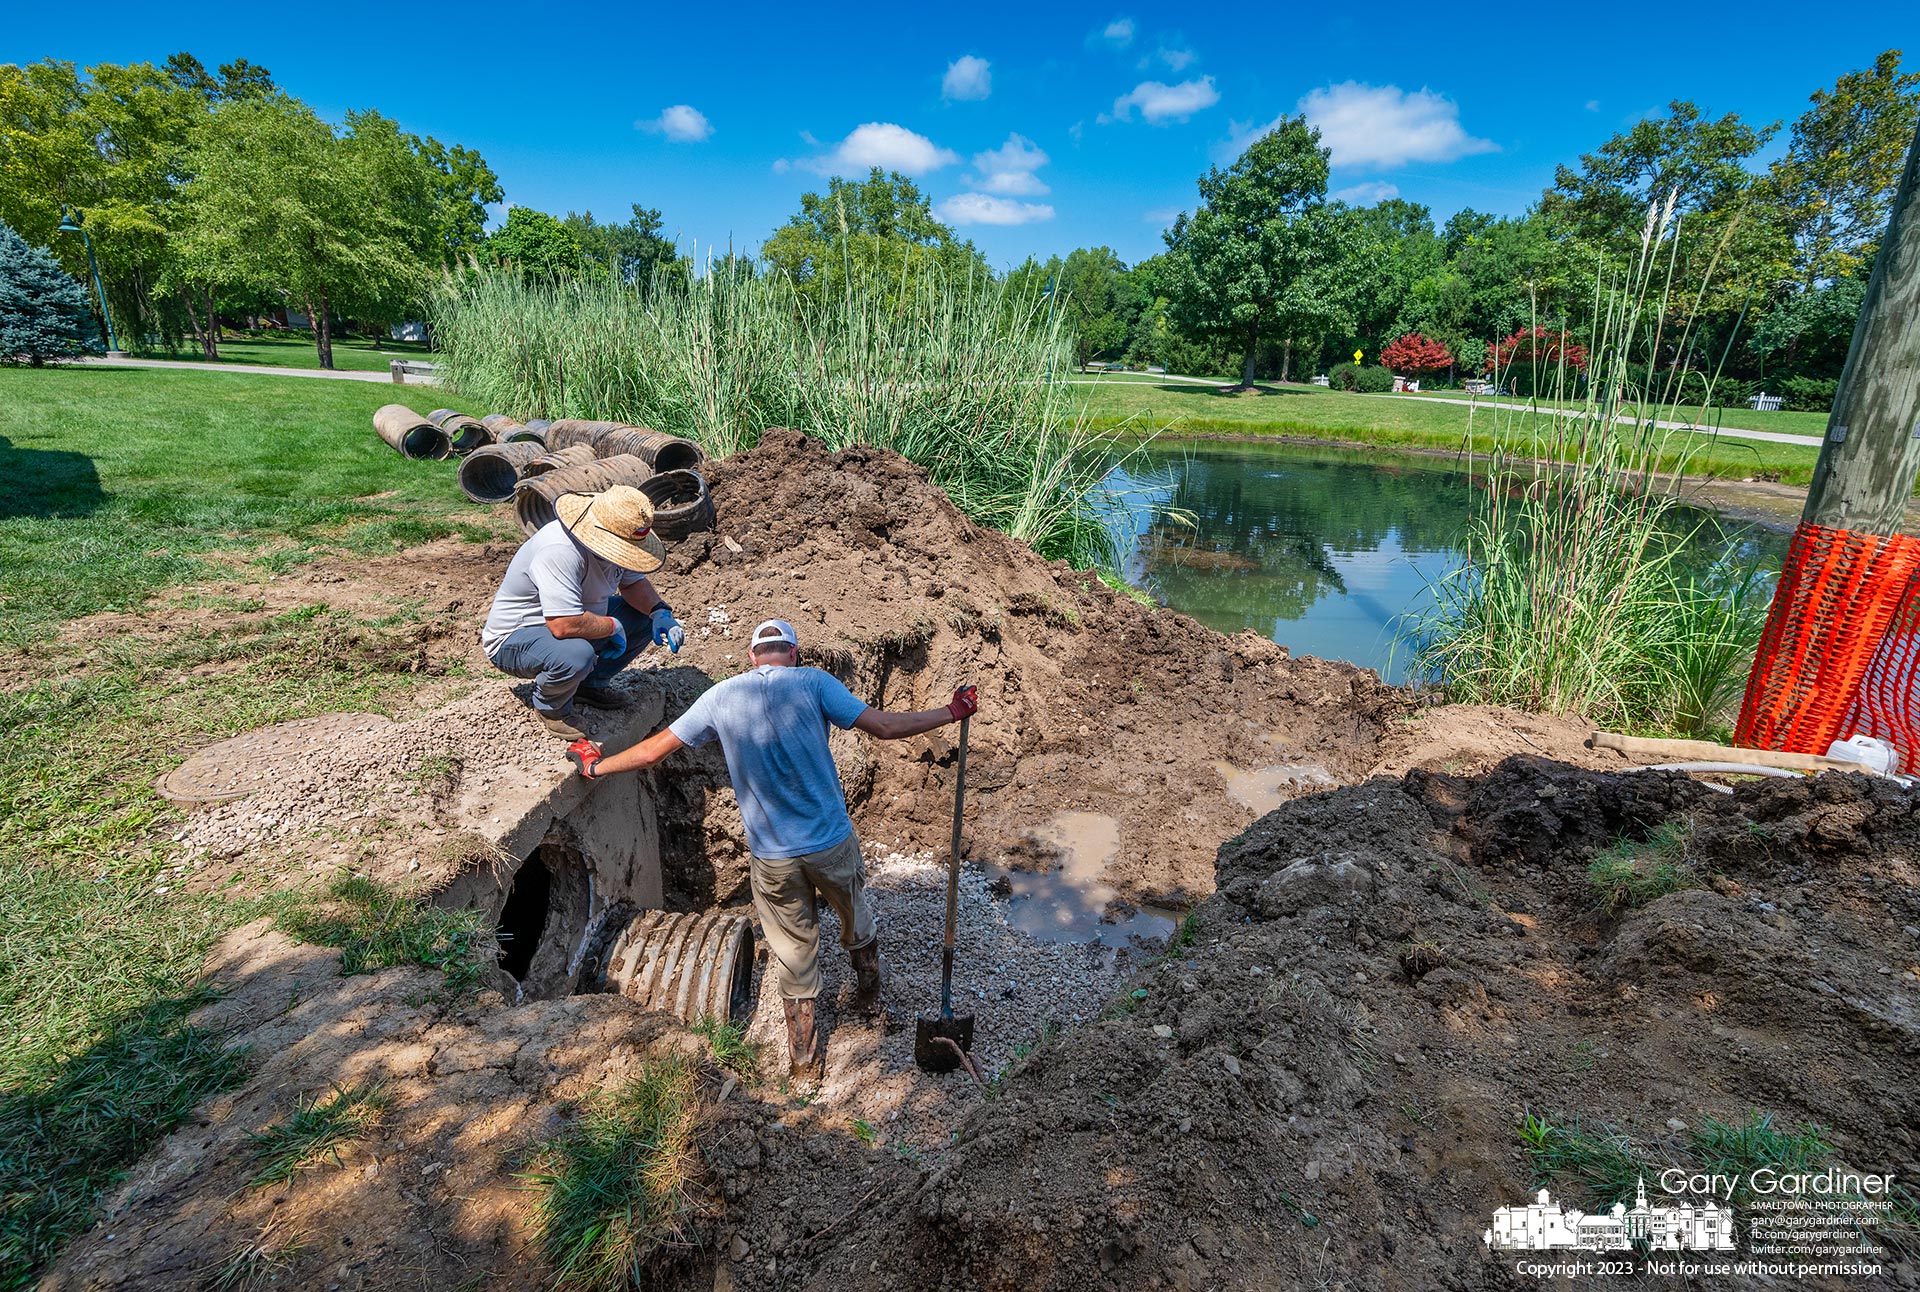 Westerville Parks workers replace damaged storm drain pipes at Heritage Park after partially draining and damming the ponds to keep backflow out of the excavated area. My Final Photo for August 22, 2023.